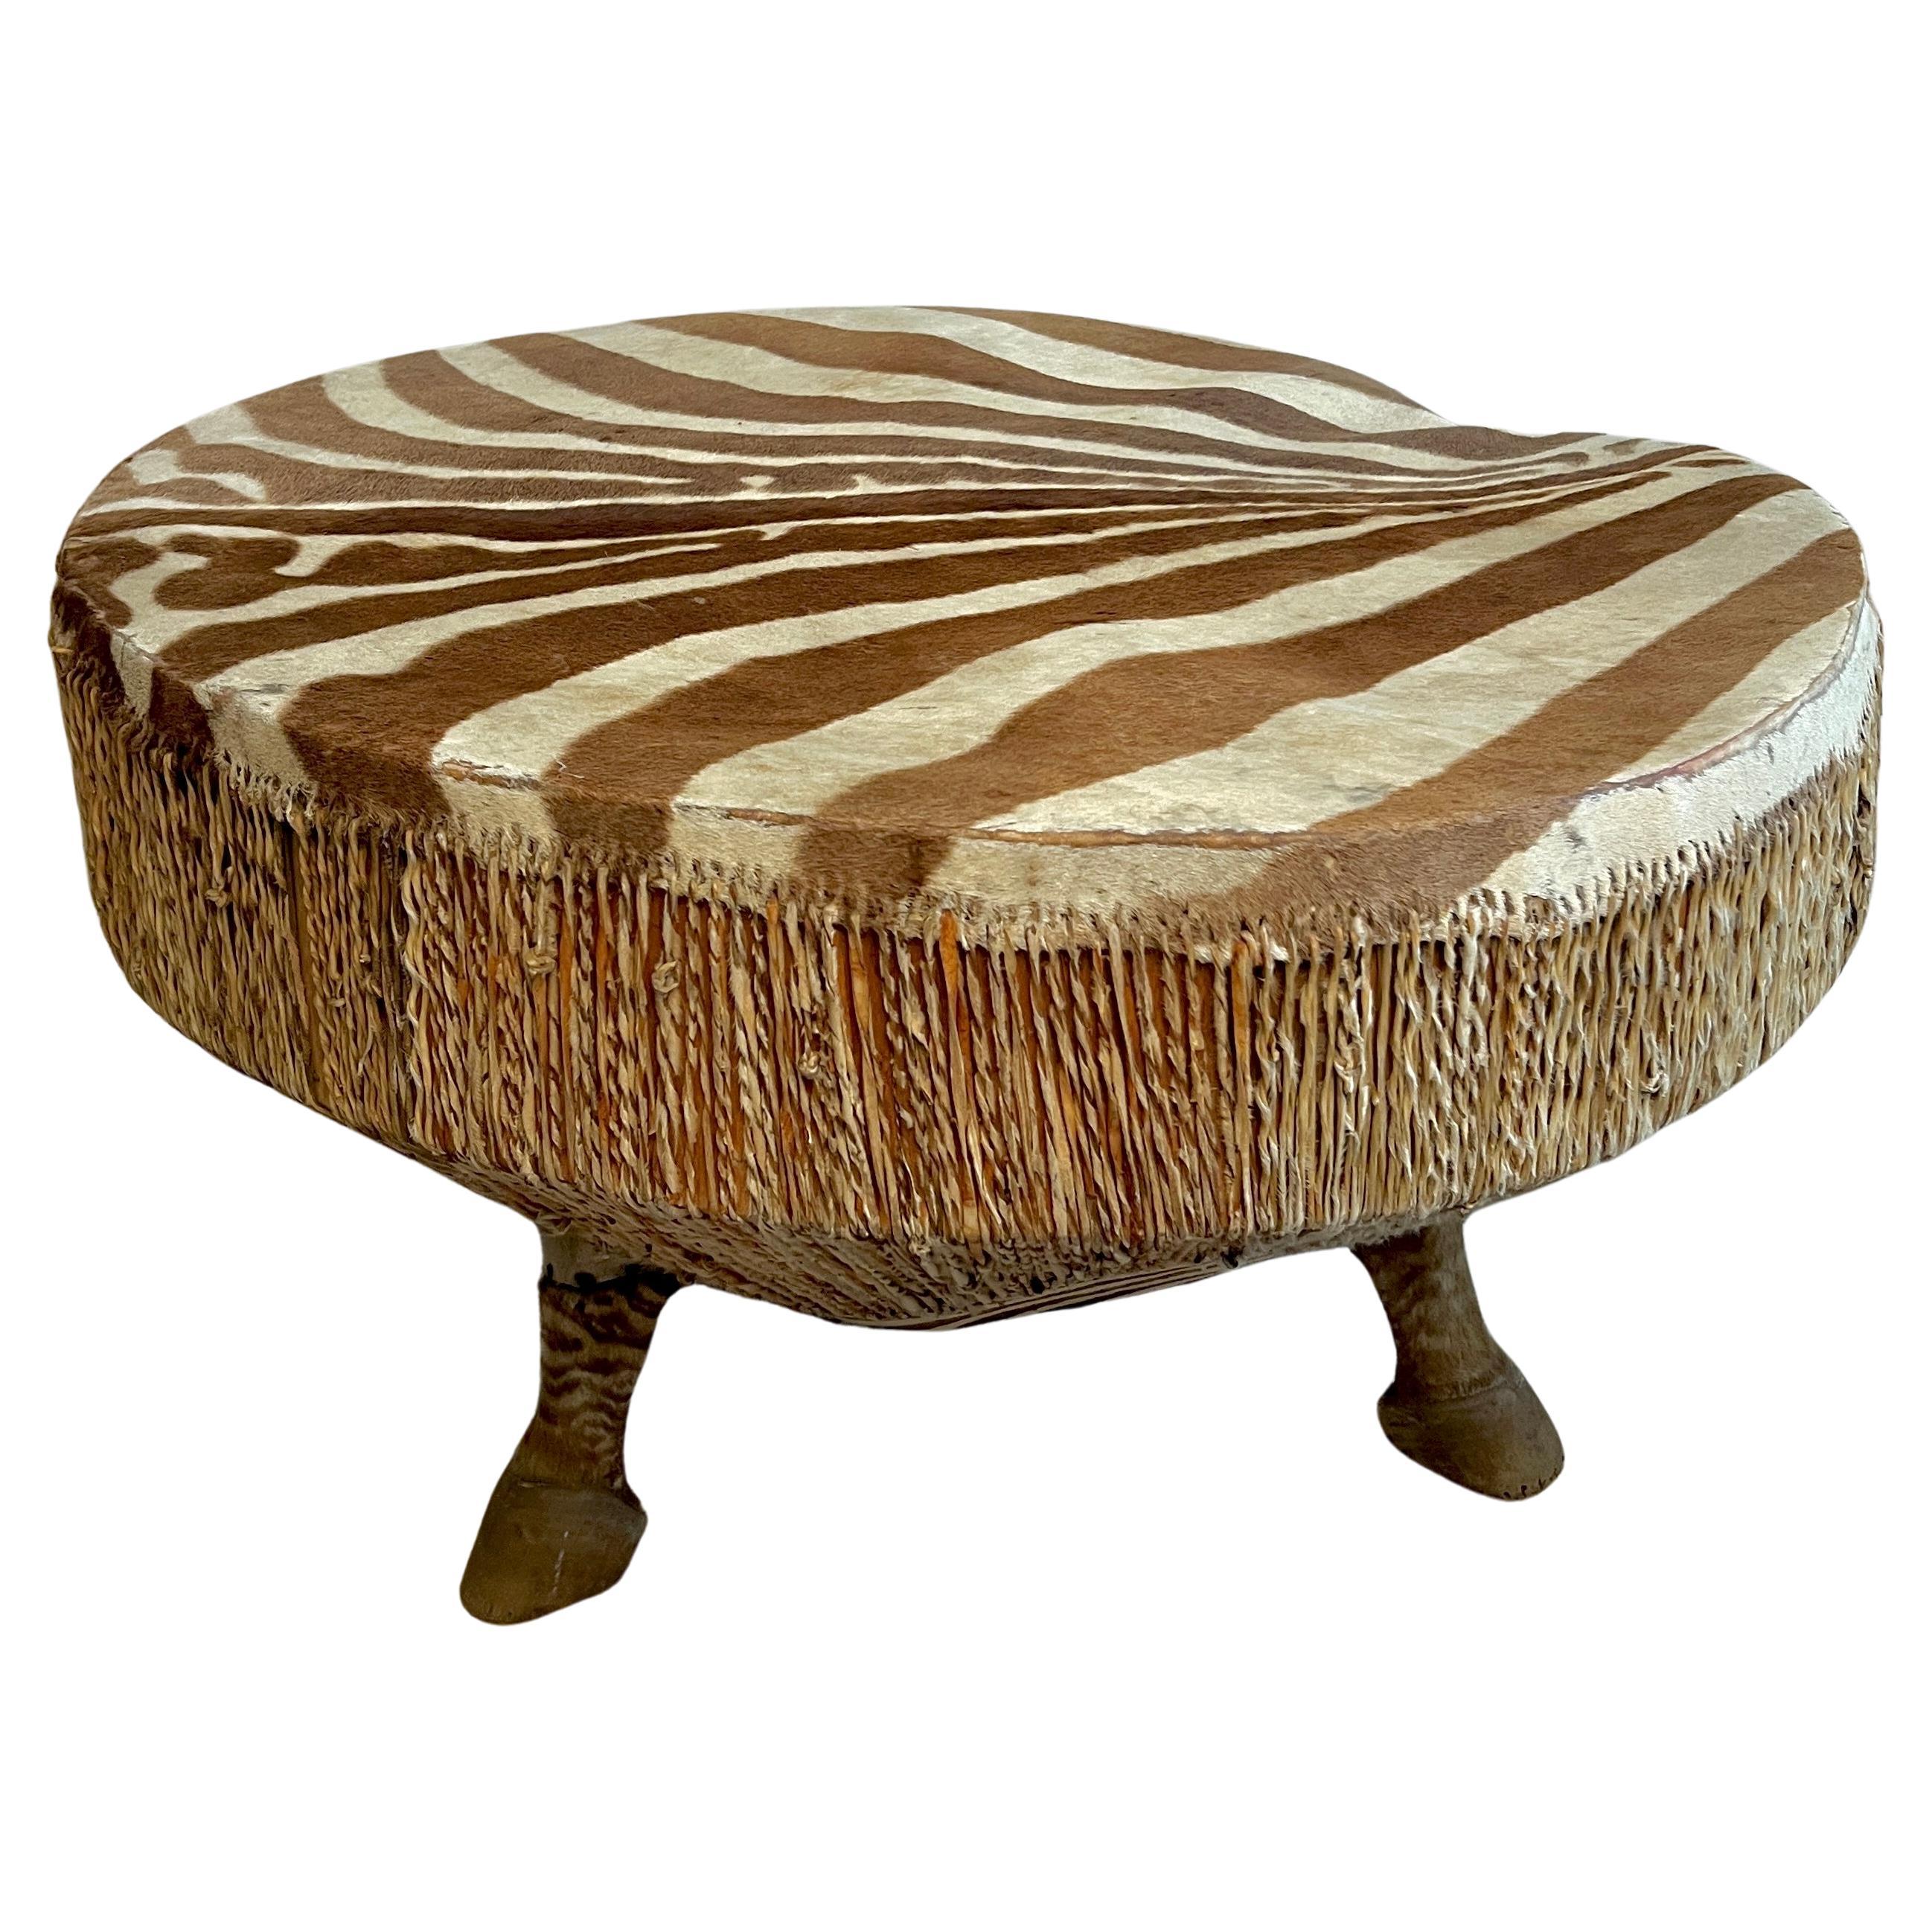 This is the piece that makes for a great conversation and adds depth to many interiors. Authentic zebra skin table in very good condition and ready for any room; 34